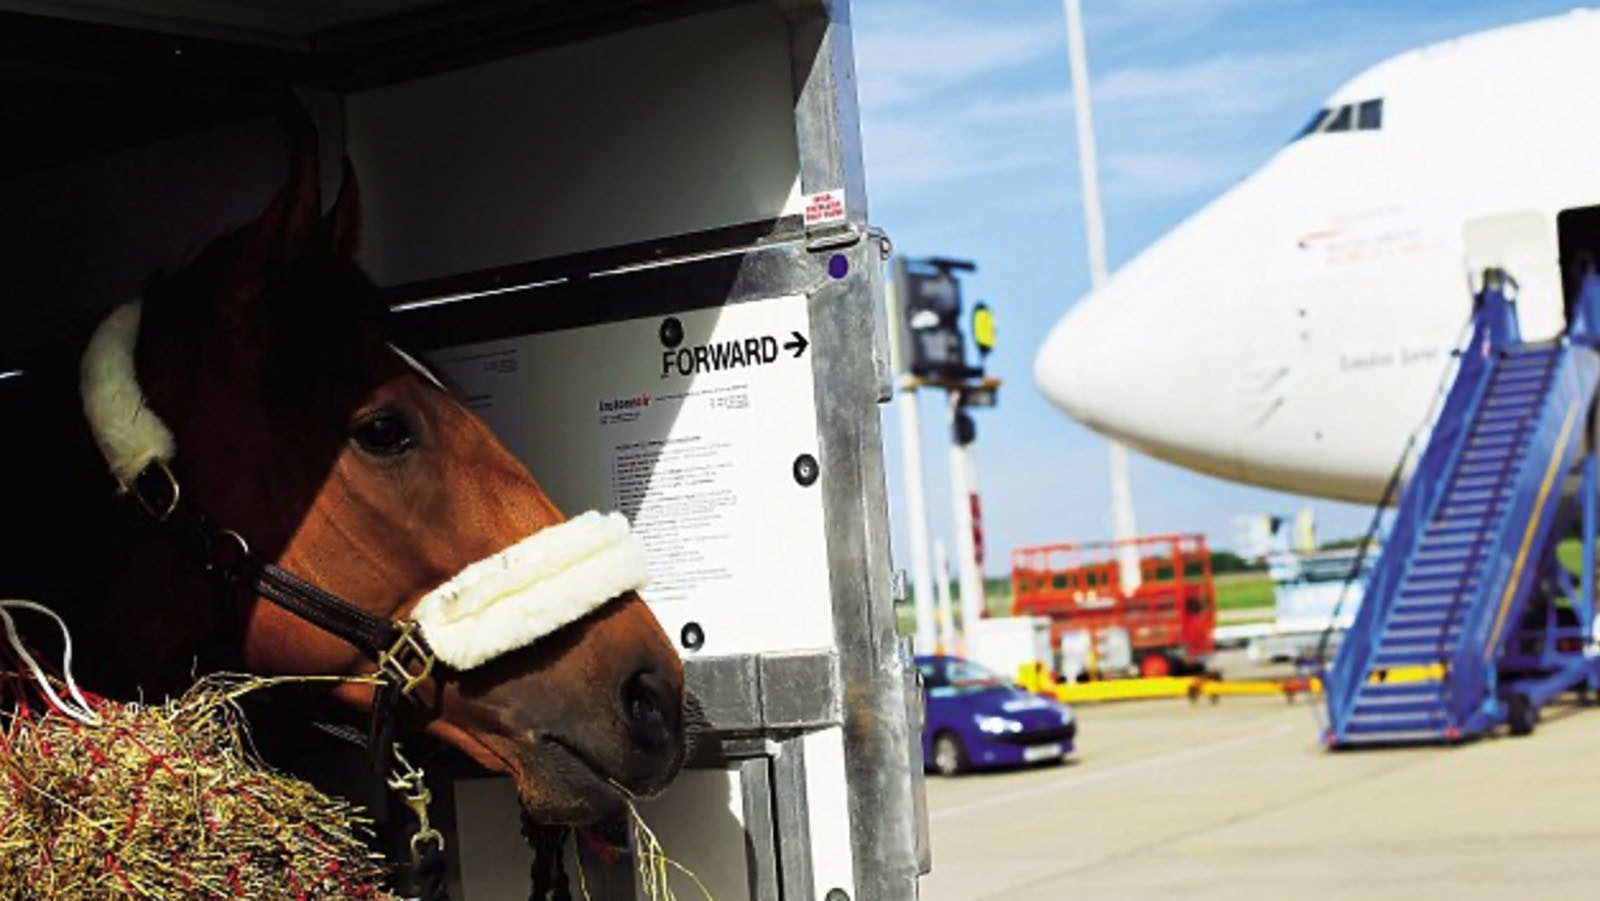 A horse pokes its nose out the back of a cargo container while waiting to be loaded onto a plane. It has all the conforts of its home stall.